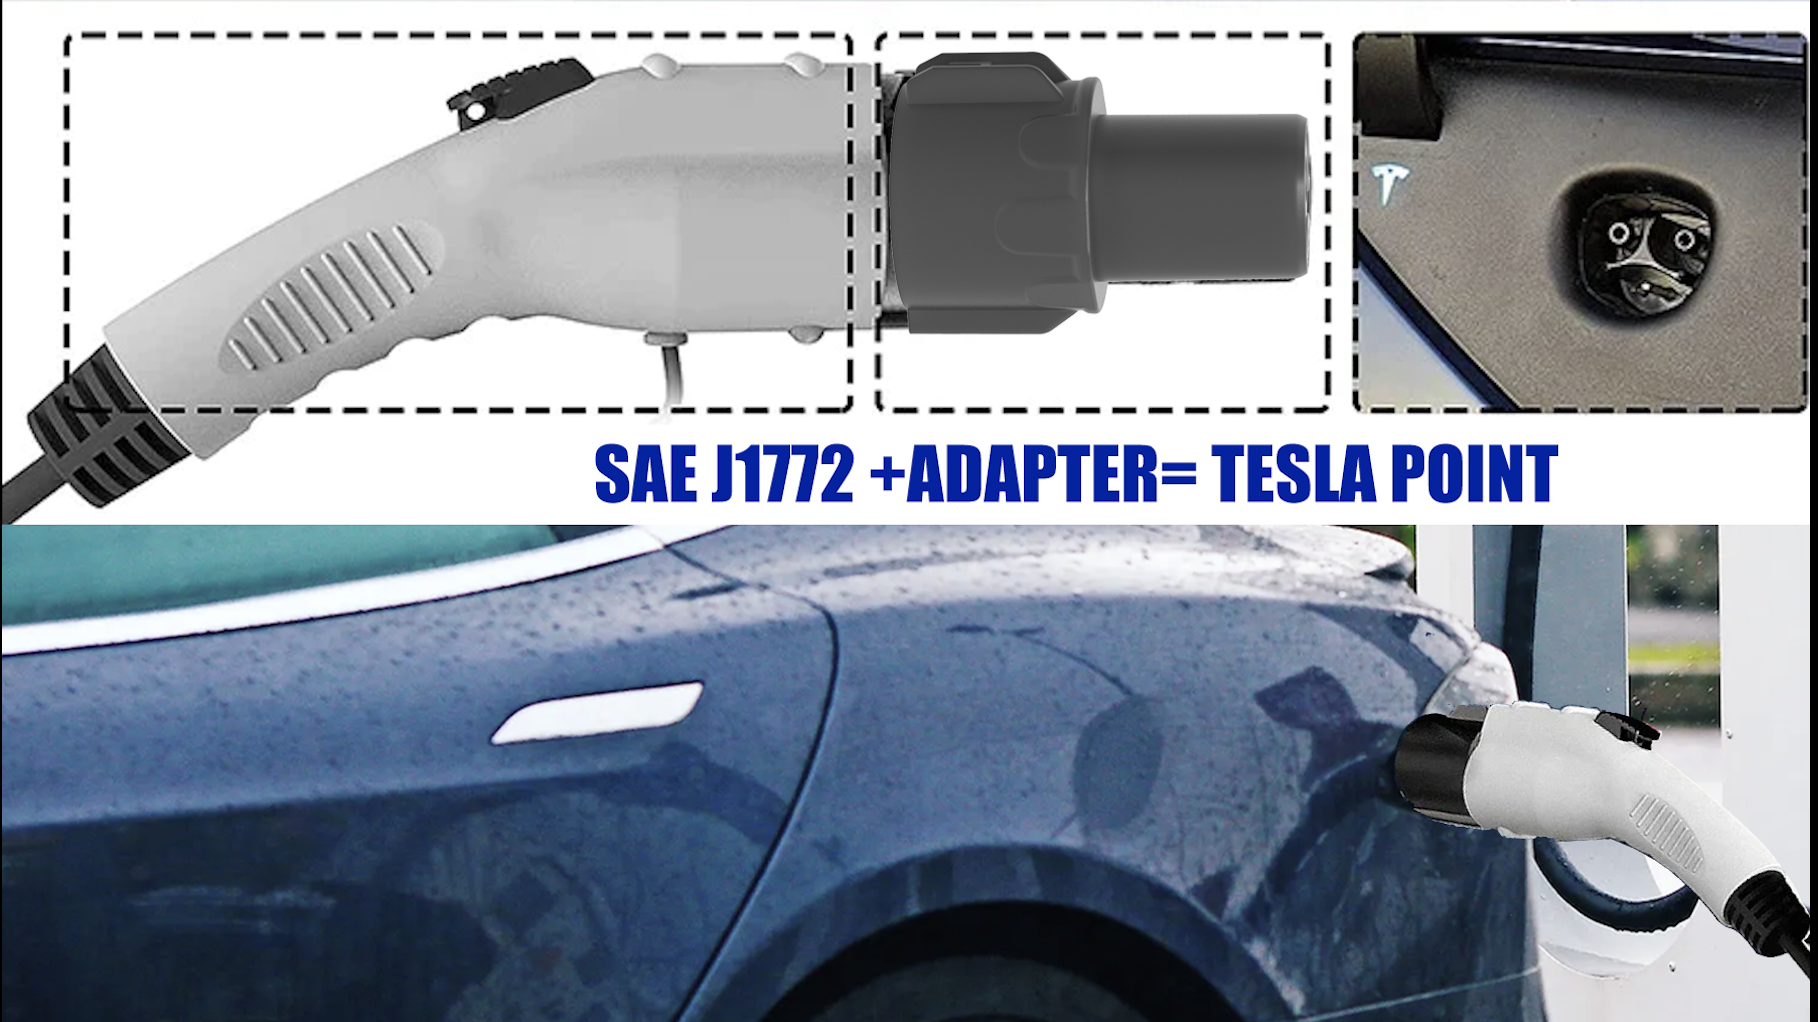 Ev Charger Adapter To Tesla， Ev Charger To Tesla Adapter，J1722 Adapter，J1722 Adapter to Telsa,J1722  to Telsa Adapter, Telsa adapter, type 1 to Telsa adapter, Ev Charging Adapters， Ev Charger Adapter，Ev Charger Adapter Typers
Ev Charger Adapter Cord，Ev Charger With Adapters，Ev Charger Adapter Kit，Electric Car Charger Adapter，Ev Plug Adapter，Electric Car Charger Adapter Plug，Ev Charger Plug Adapter，Ev Car Charger Adapter，Electric Car Plug Adapter，Adapter For Electric Car Charger，Electric Vehicle Charging Adapter，Ev Charge Adapter，Electric Charger Adapter，Electric Vehicle Adapters，Charge Point Adapter，Electric Vehicle Charging Adapters，999